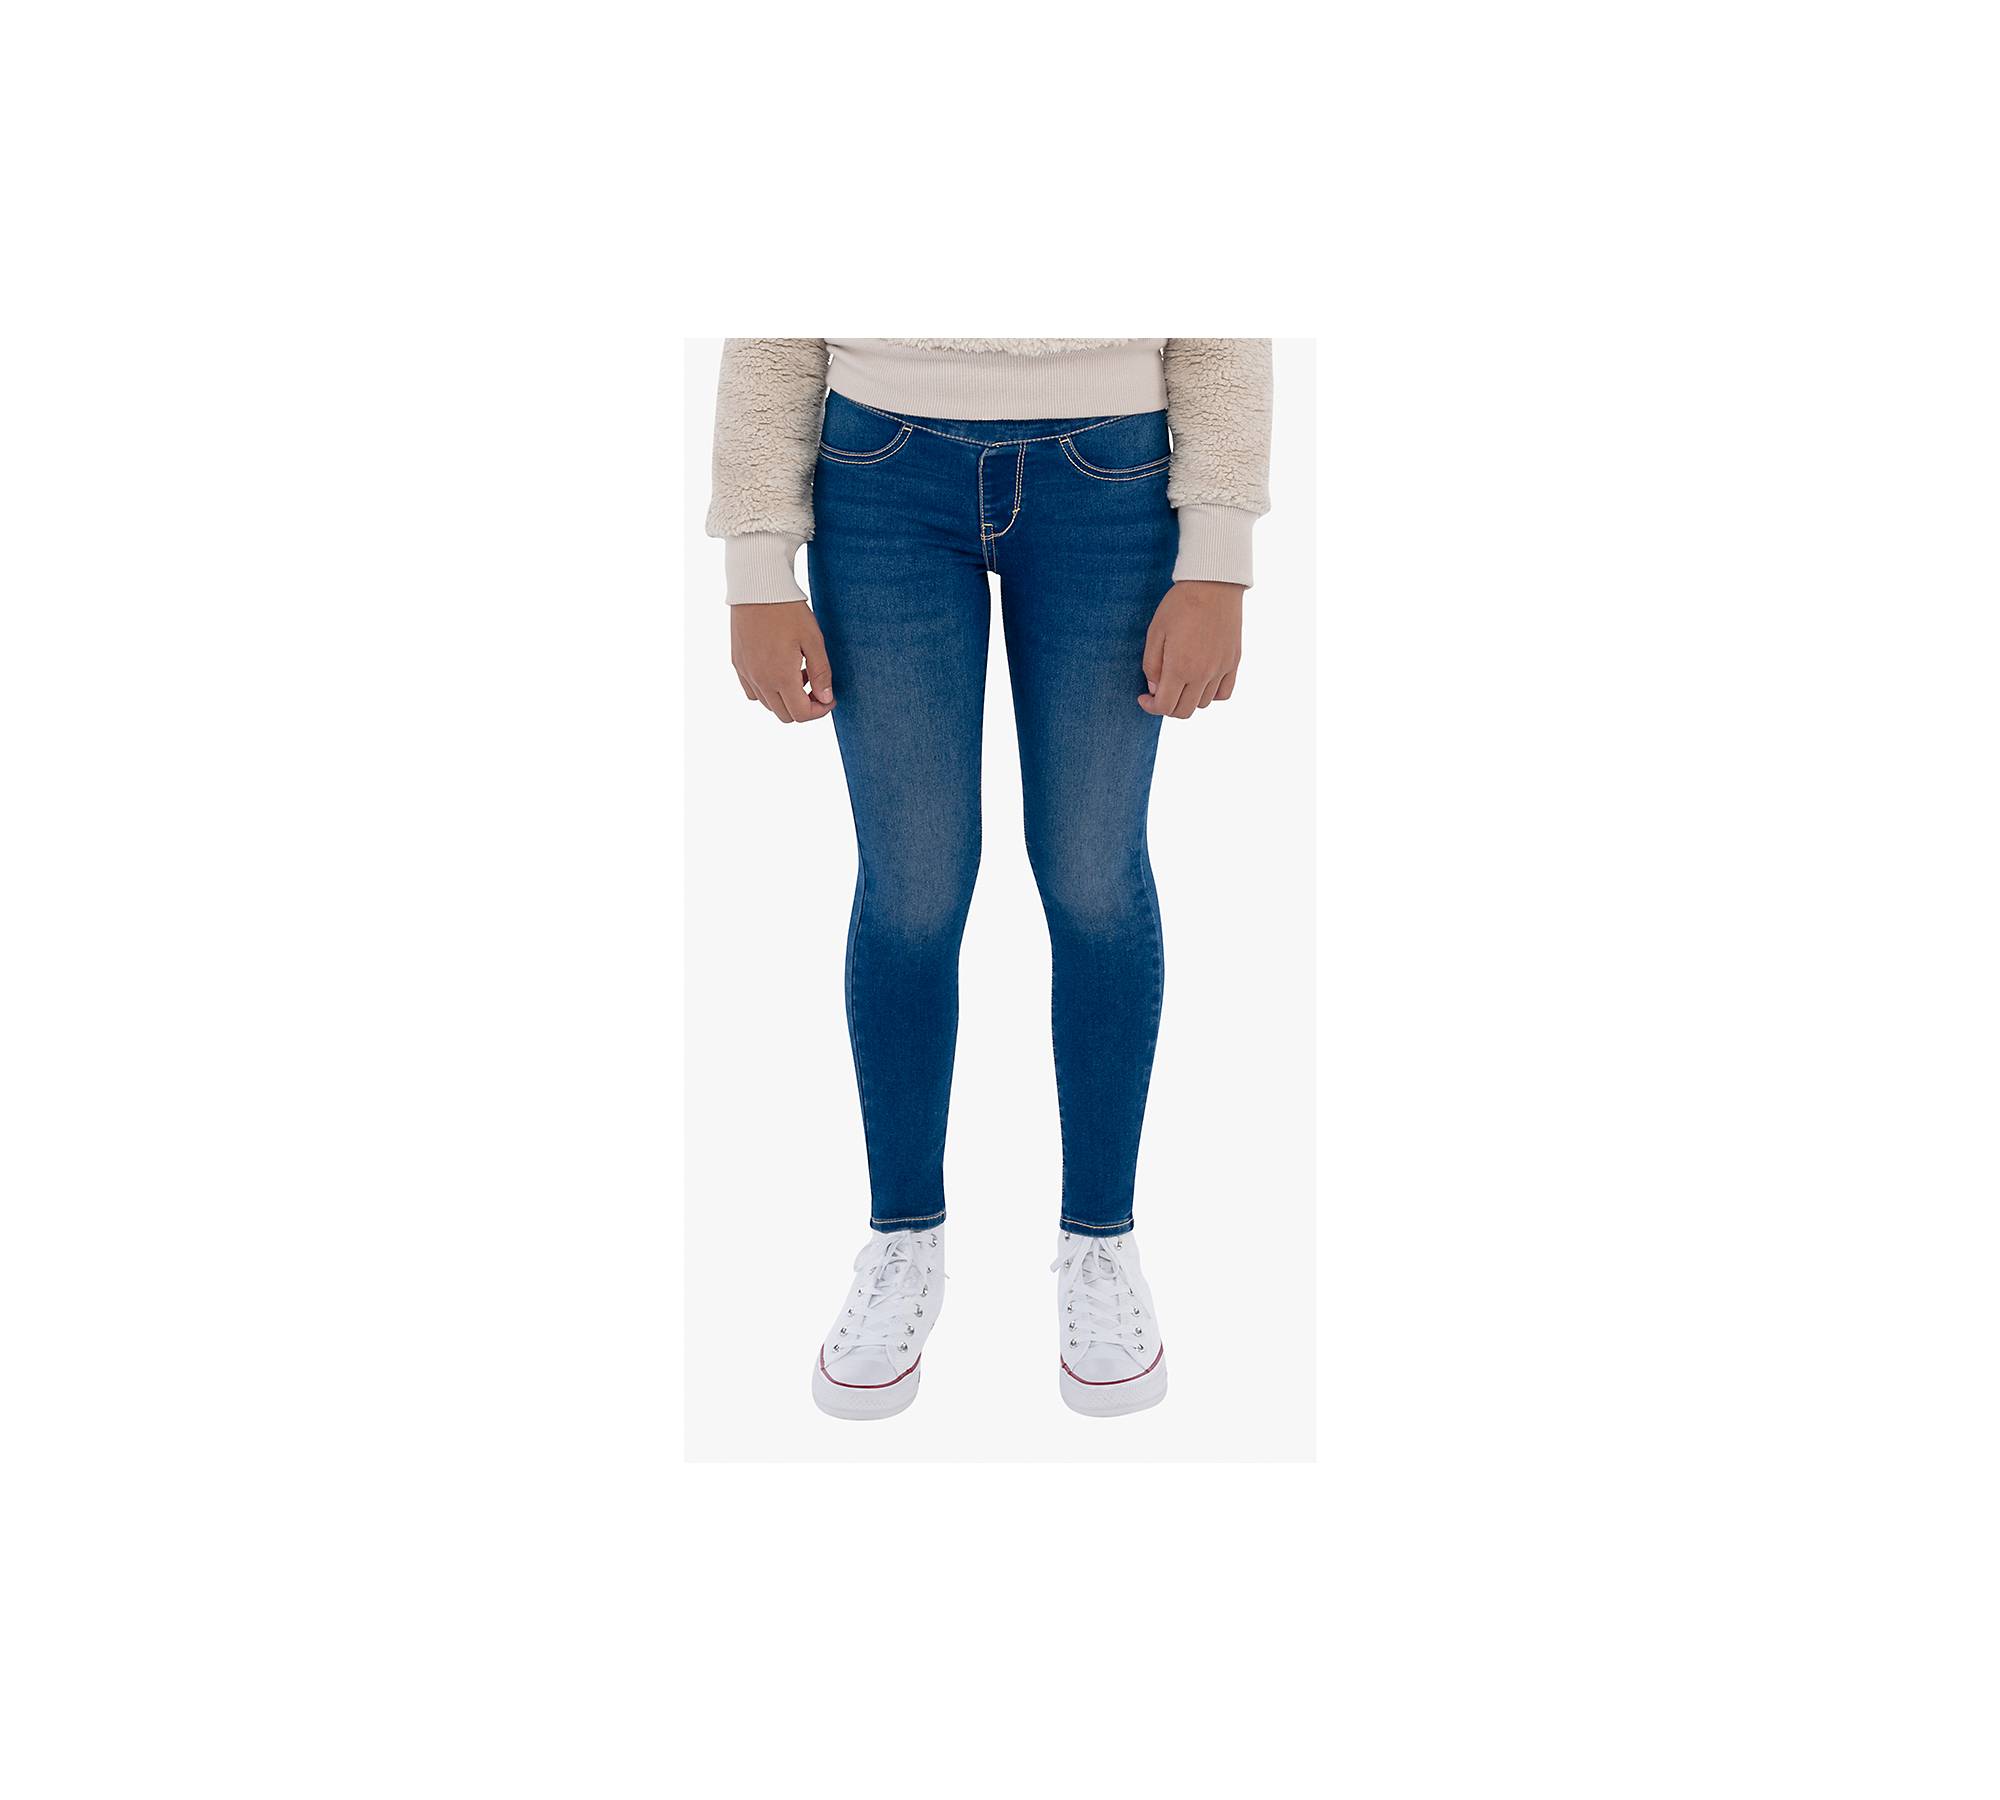 Levi's Little Girls Super Skinny Fit Pull On Jeggings, Girls 4-6x, Clothing & Accessories